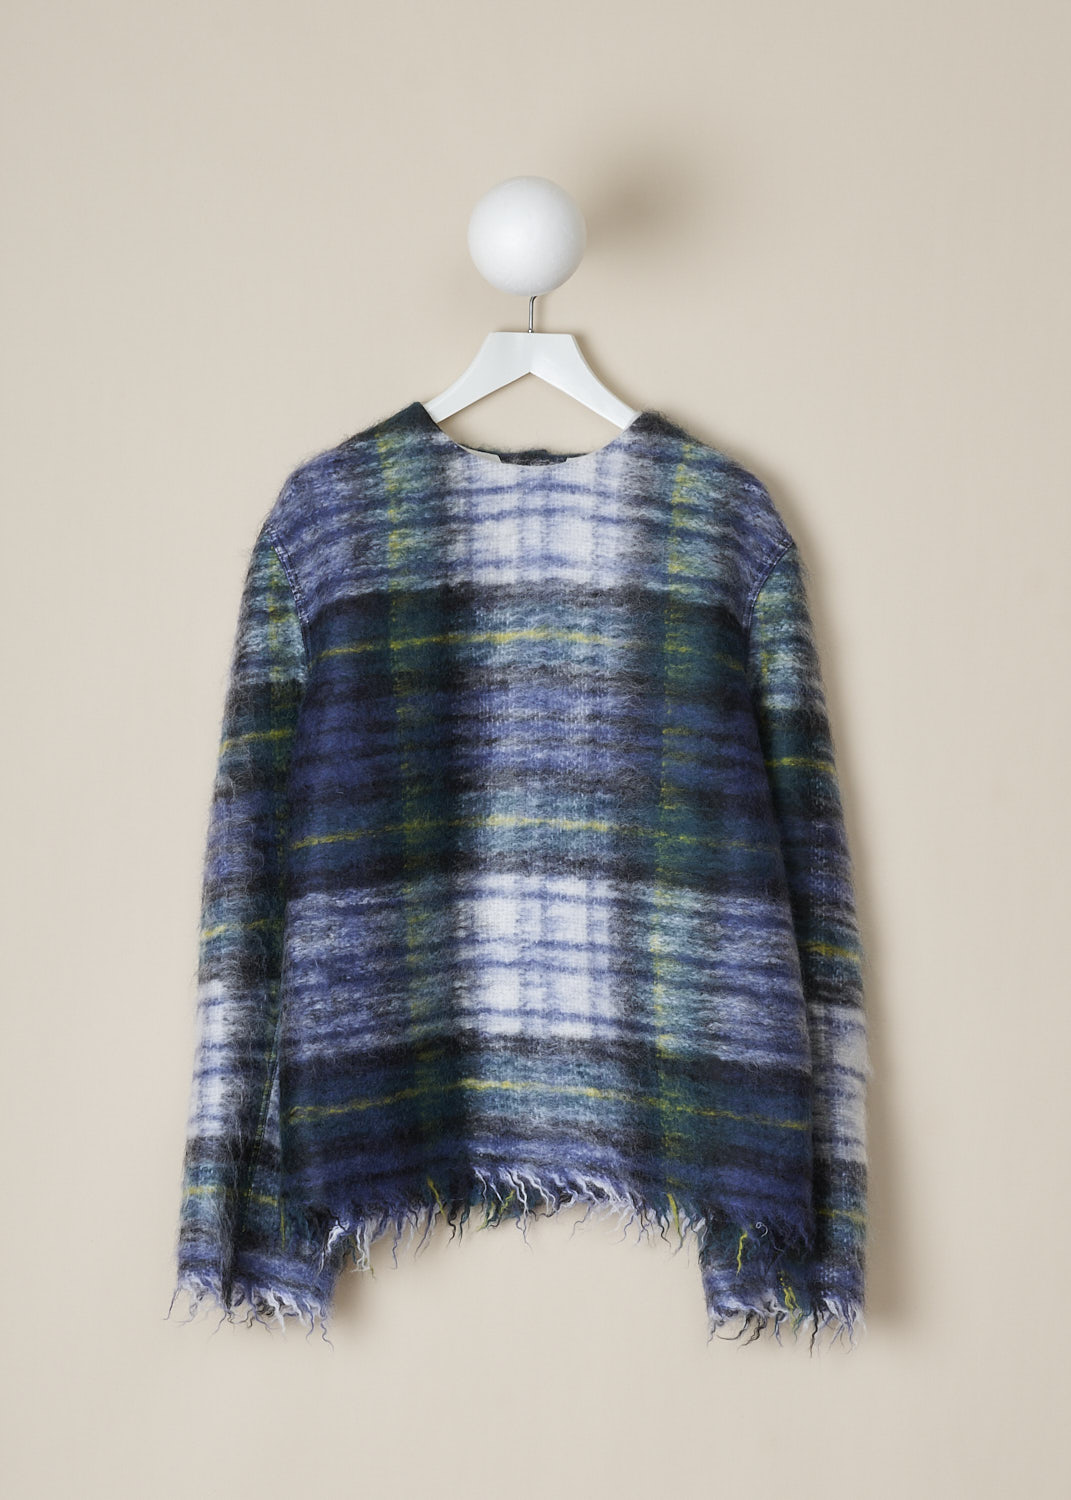 SOFIE Dâ€™HOORE, GREEN TARTAN BING TOP, BING_WOMO_GREEN_TARTAN, Green, Blue, Print, Front, This green tartan mohair-blend Bing top has a round neckline and long sleeves. Slanted pockets are concealed in the side seams. The sleeves and hemline have a raw finish. In the back, the top has a snap button closure. The top is fully lined. 
